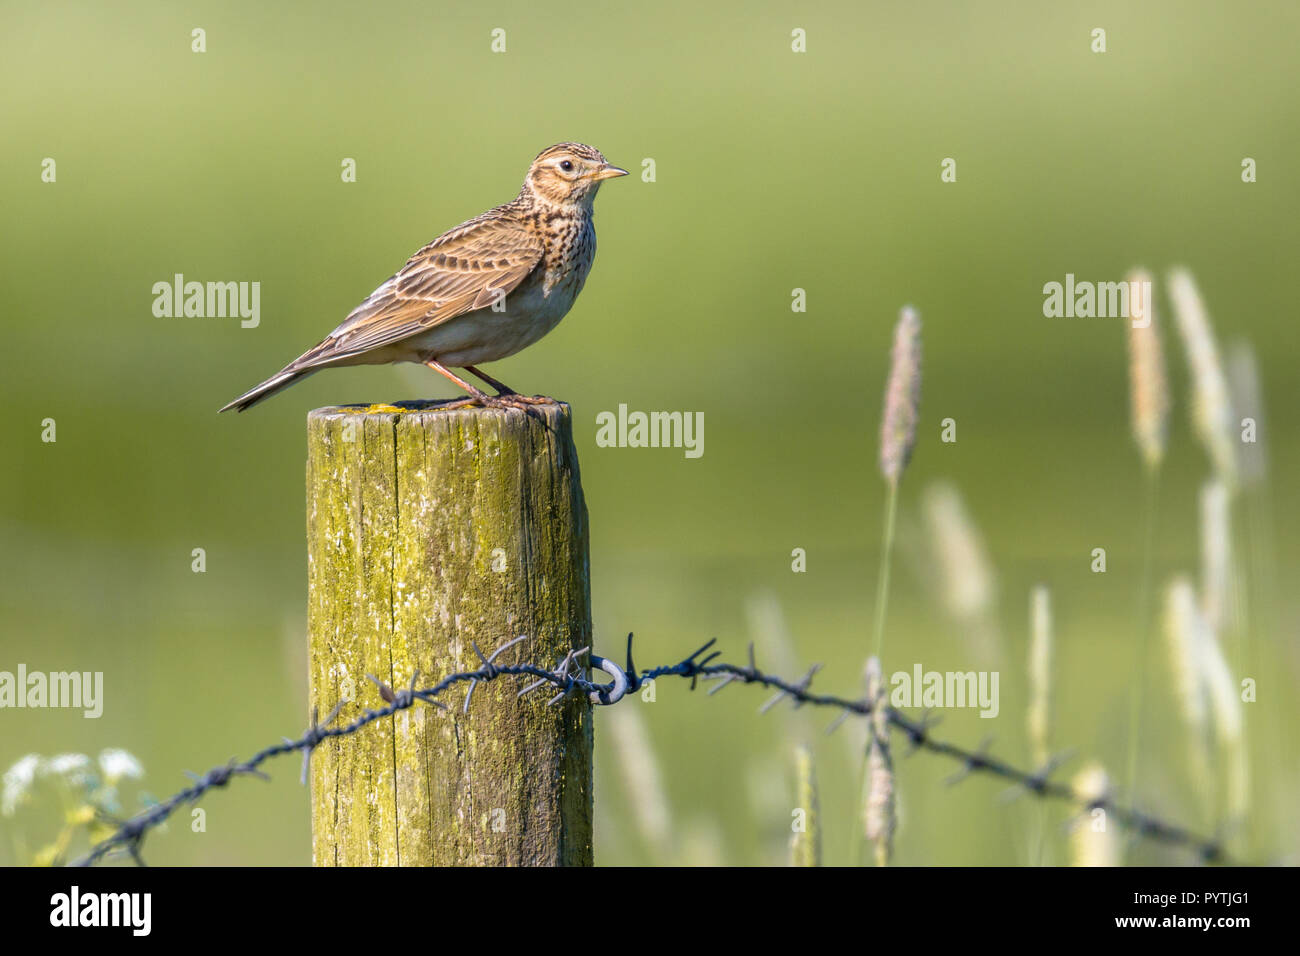 Eurasian skylark (Alauda arvensis) perched on a post in agricultural landscape. This small passerine bird species is a wide-spread species found acros Stock Photo